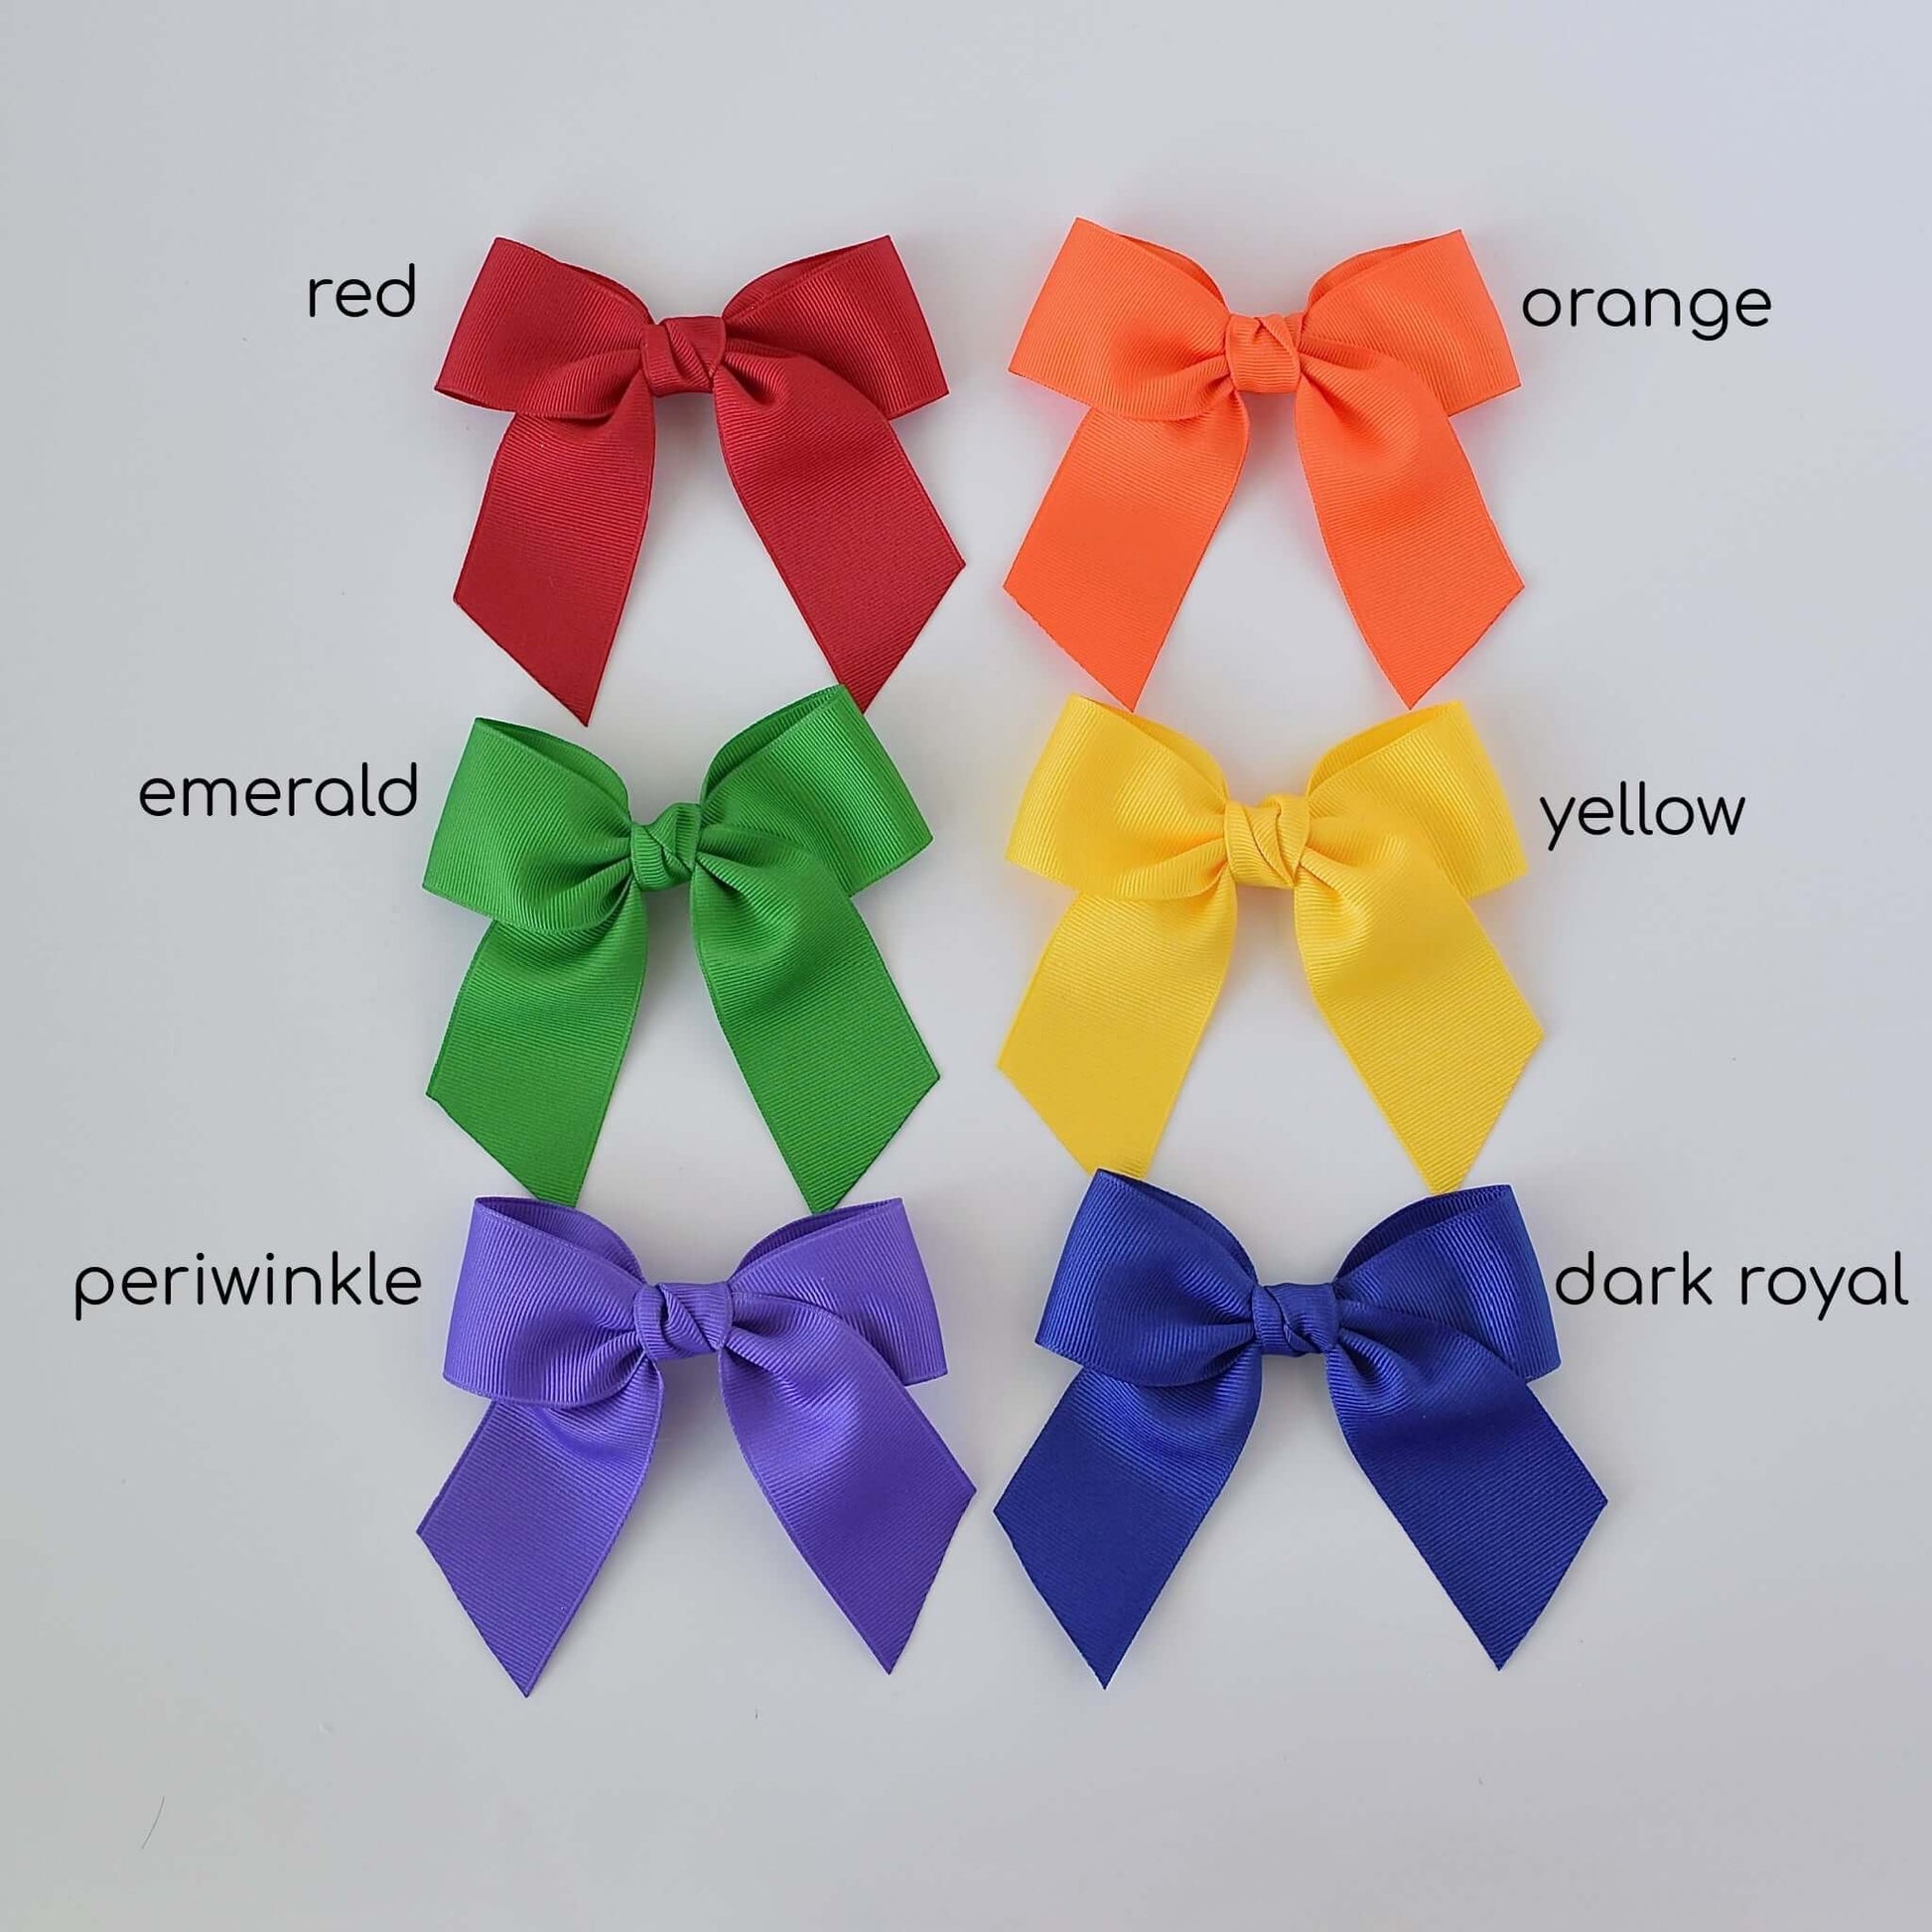 4 inch grosgrain sailor bows in rainbow colors – red, orange, emerald, yellow, periwinkle, dark royal – arranged in rows, perfect for toddlers and girls